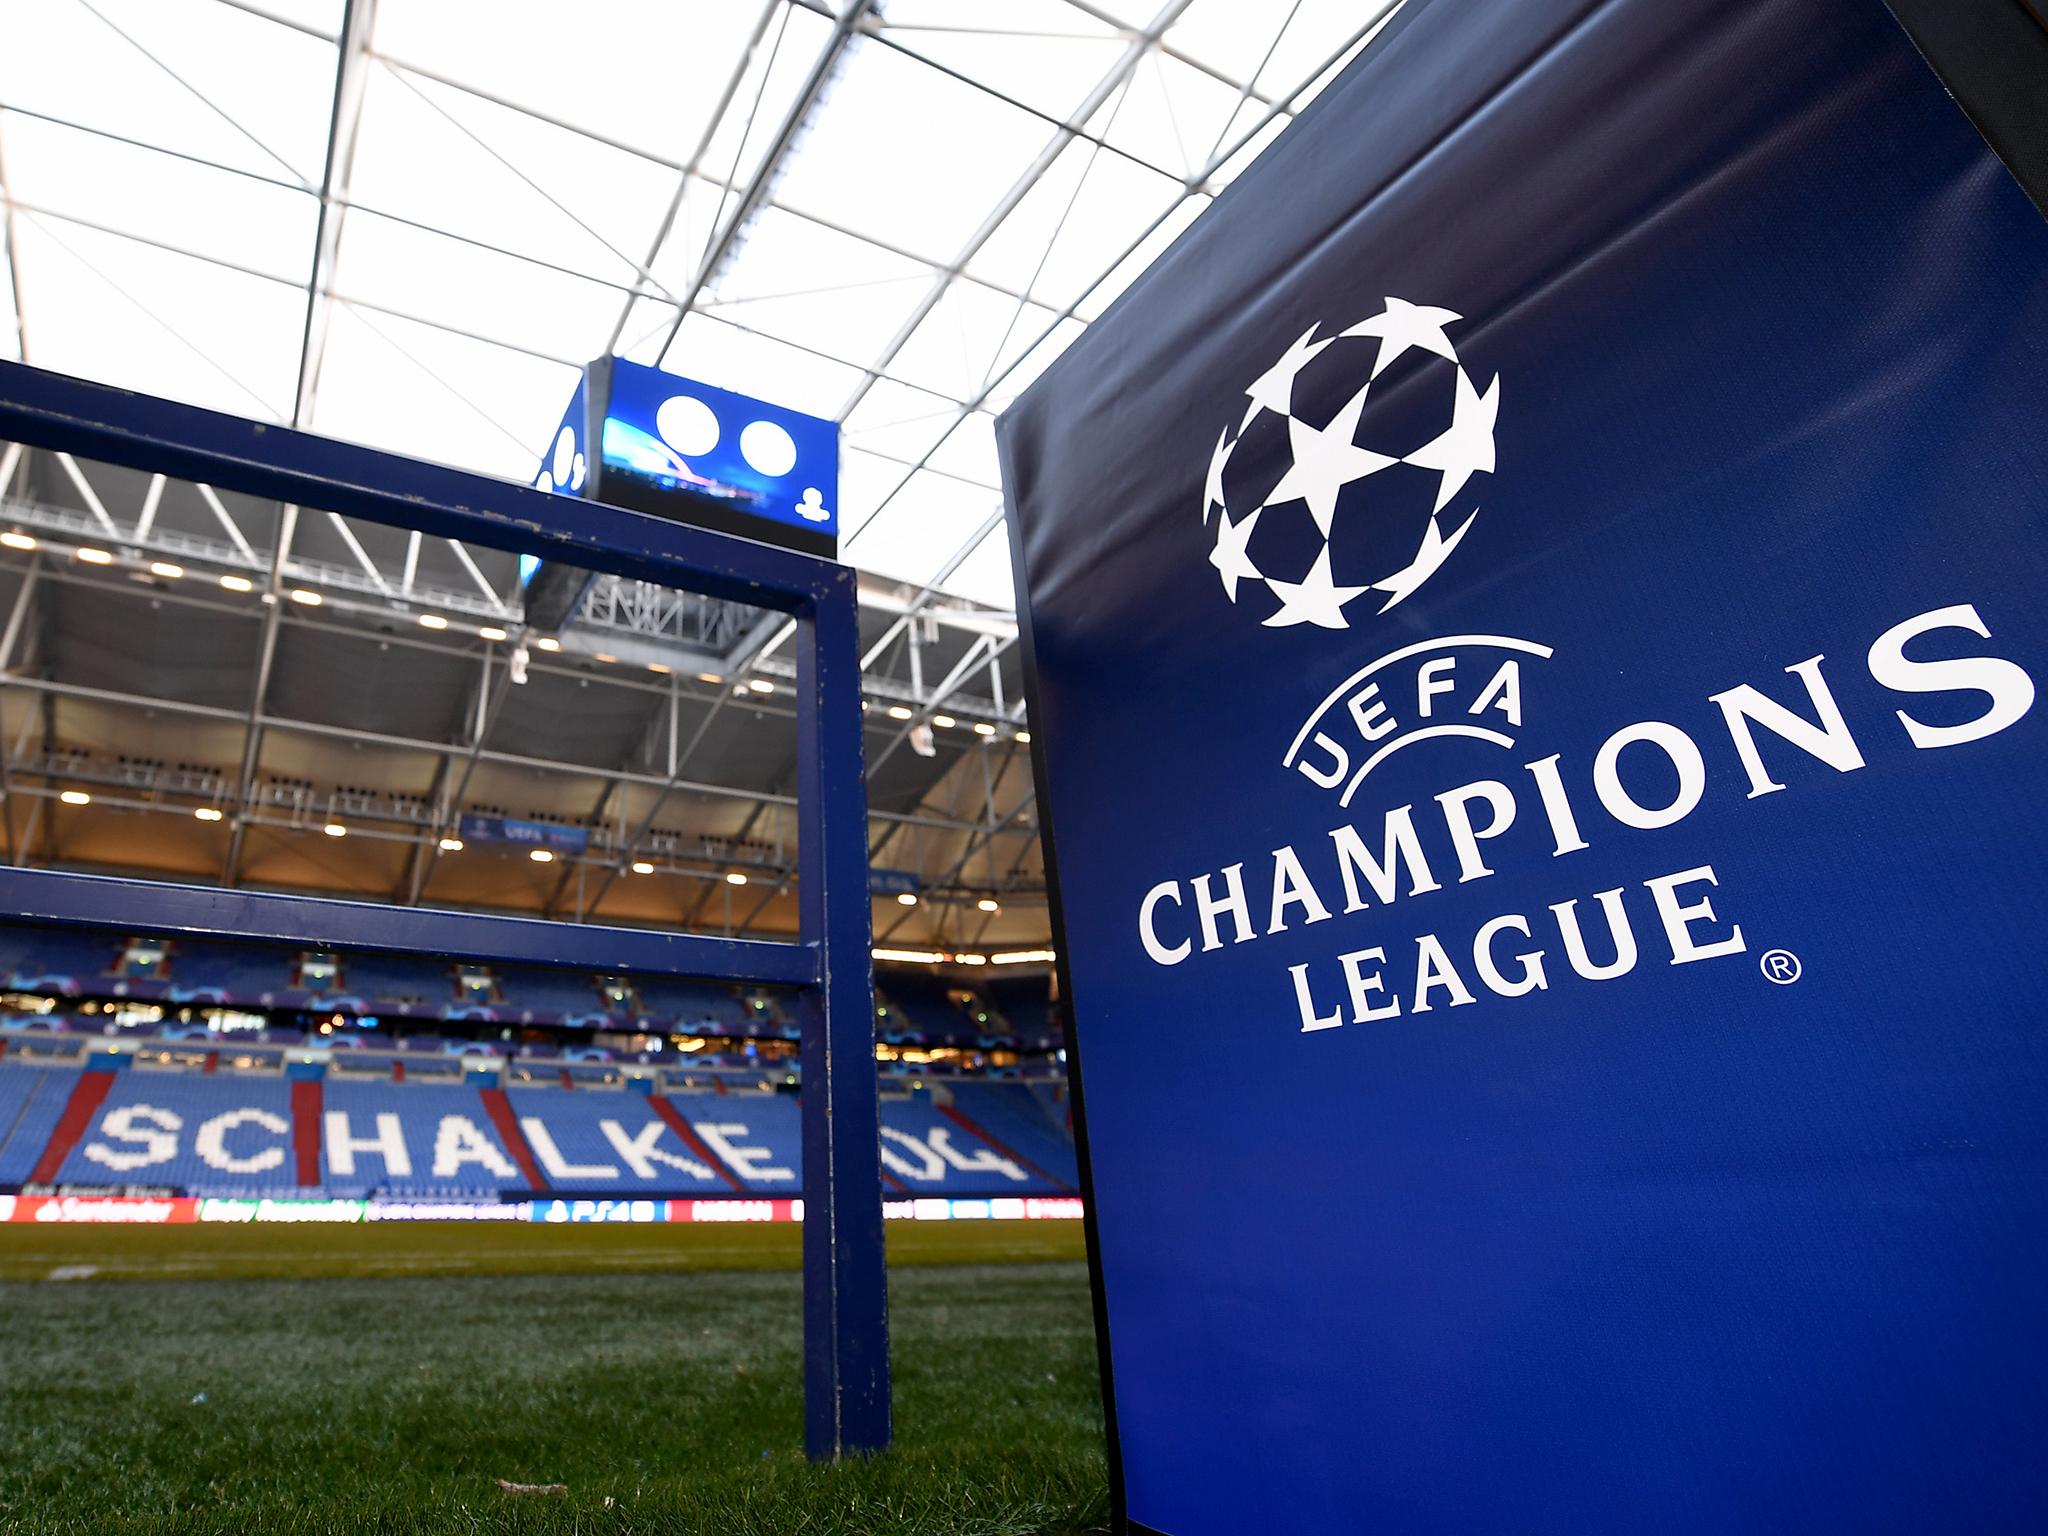 A Schalke fan has been charged with attempted murder for attacking a Manchester City supporter